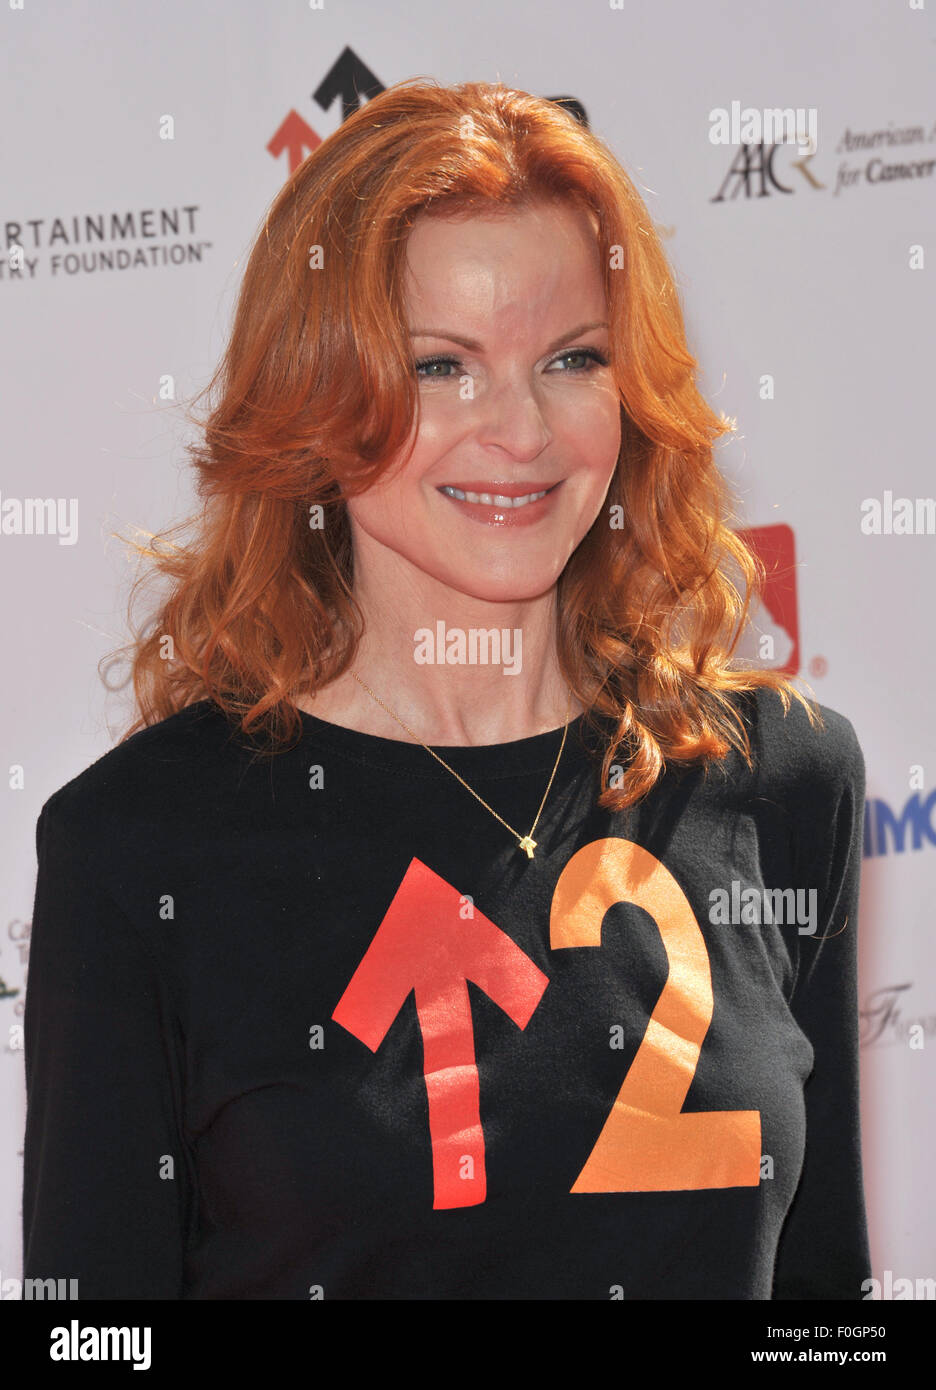 LOS ANGELES, CA - SEPTEMBER 10, 2010: Marcia Cross at the Stand Up To Cancer event at Sony Pictures Studios, Culver City. Stock Photo